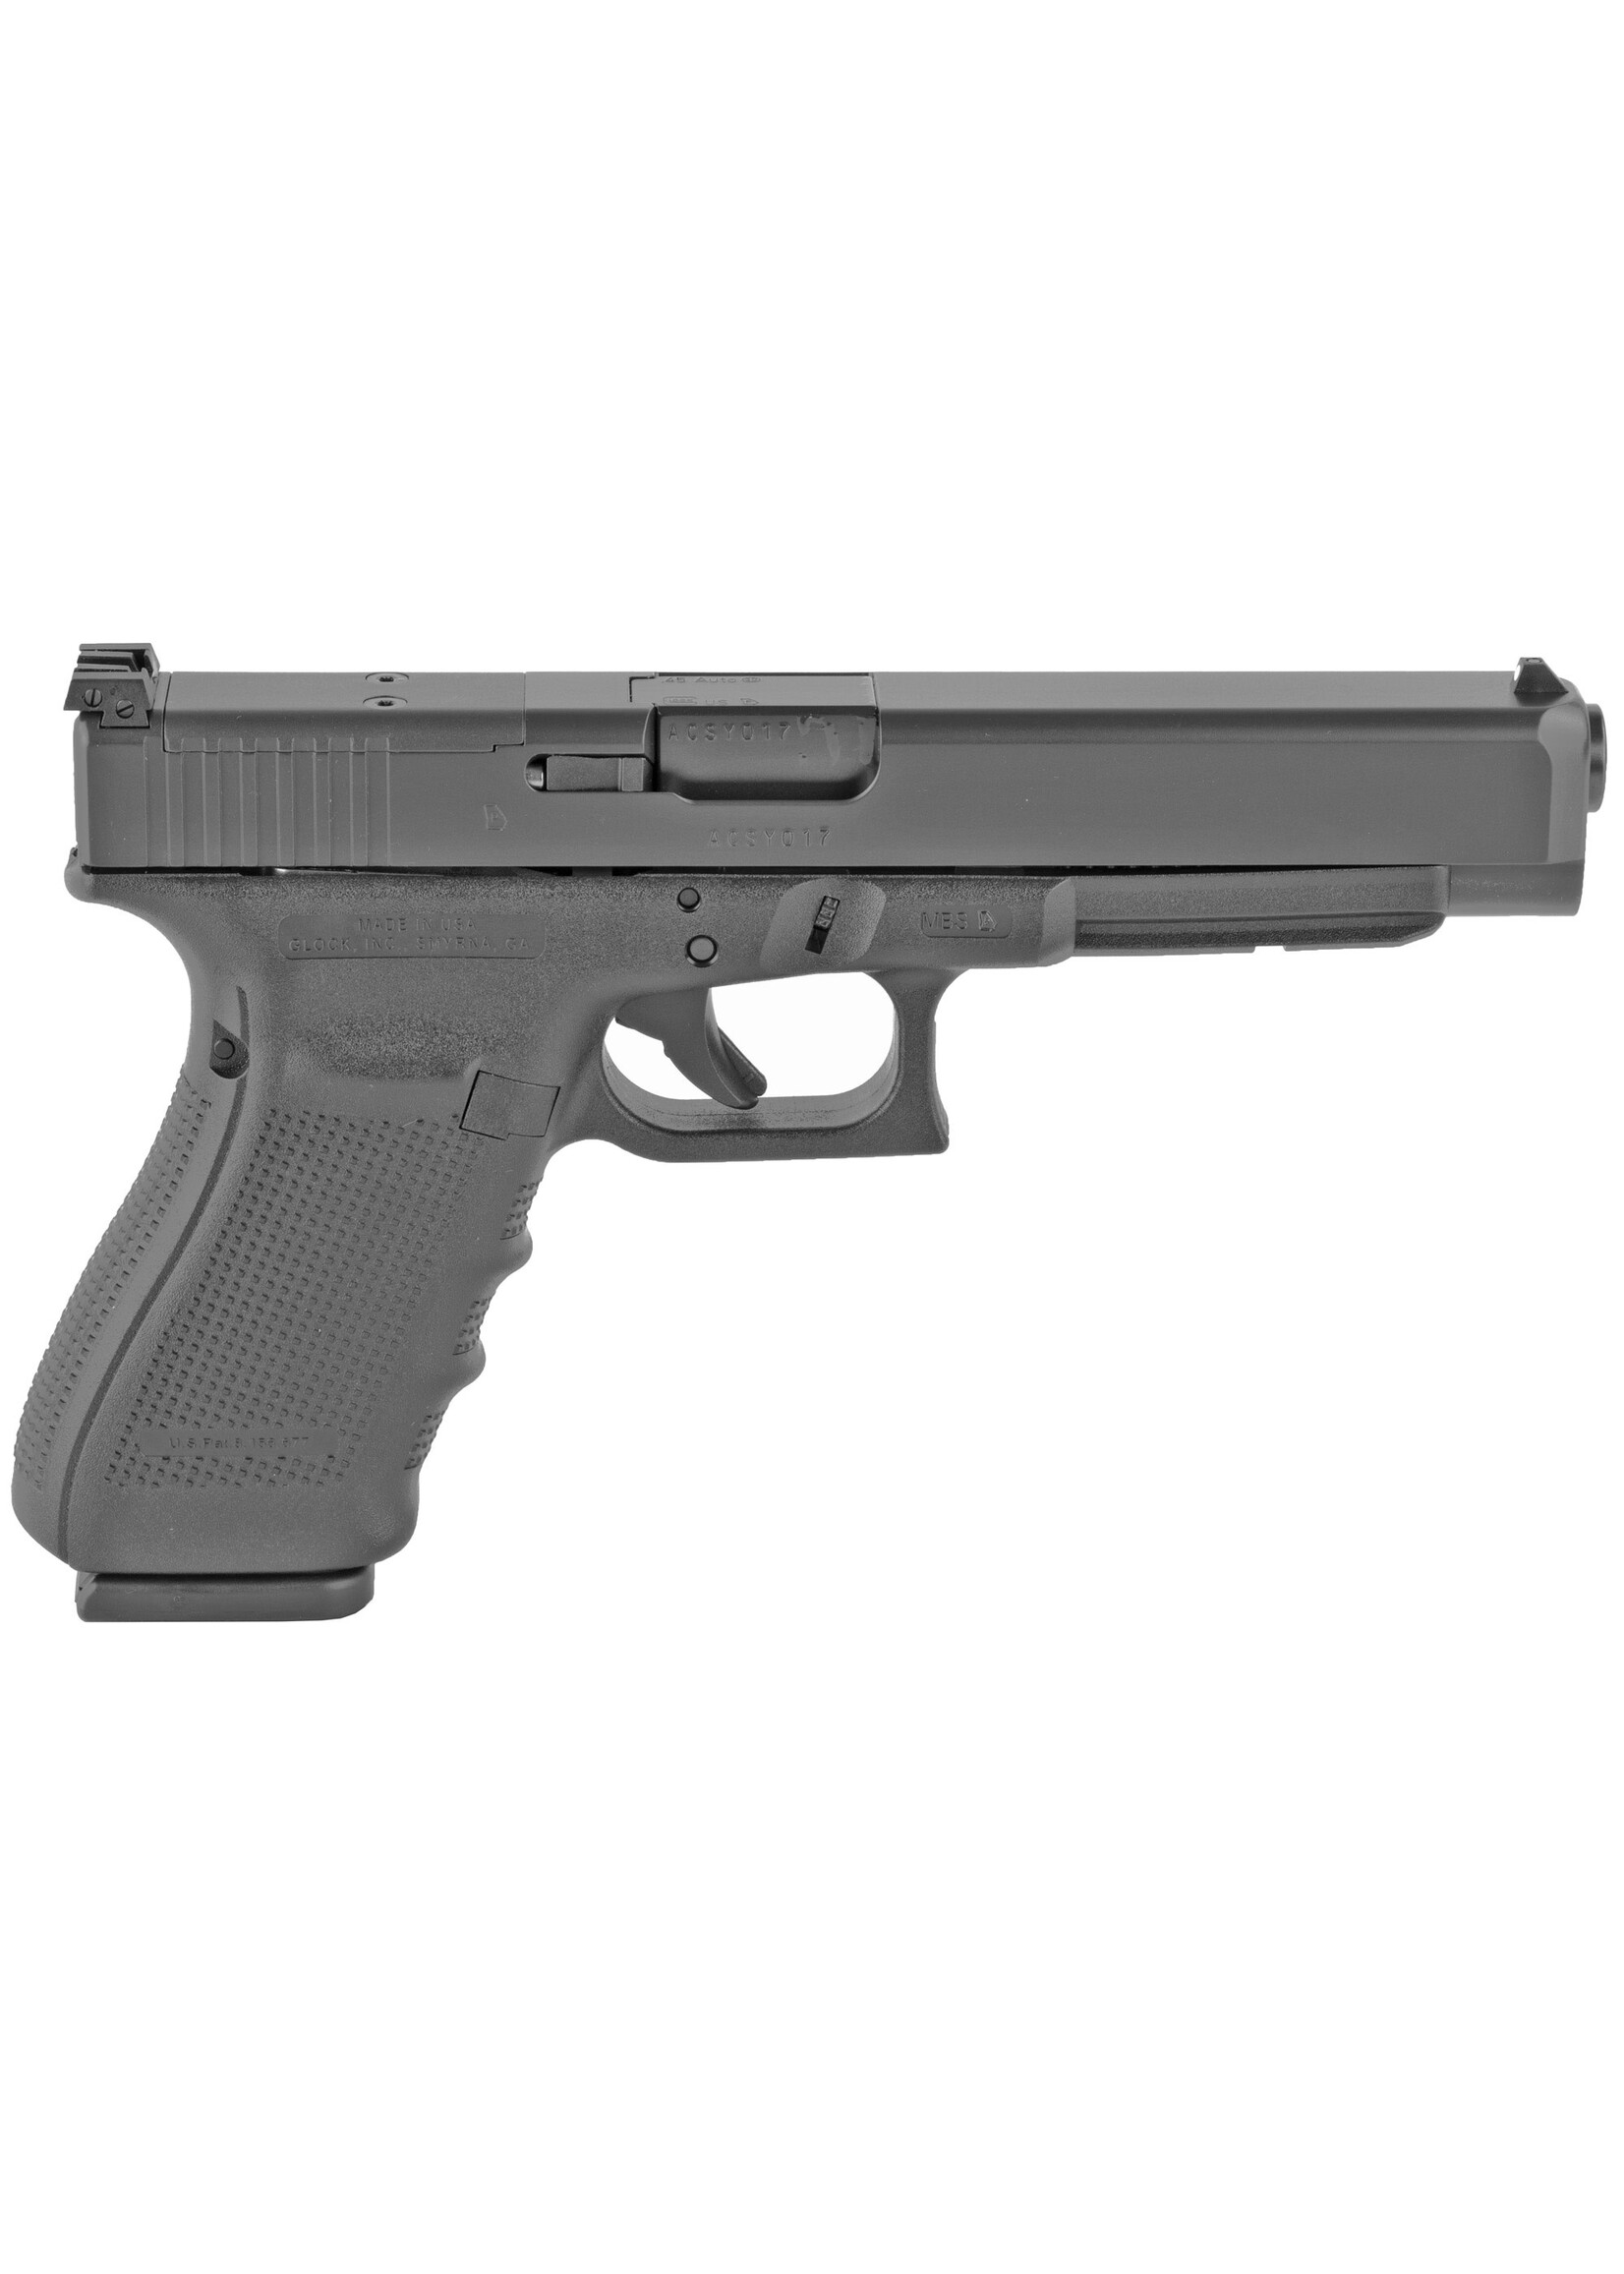 Glock Glock G41 Gen4 Competition MOS 45 ACP Caliber with 5.31" Barrel, 13+1 Capacity, Overall Black Finish, Picatinny Rail Frame, Serrated/MOS Cut Slide Finger Grooved Rough Texture Interchangeable Backstrap Grip & Adjustable Sights (US M